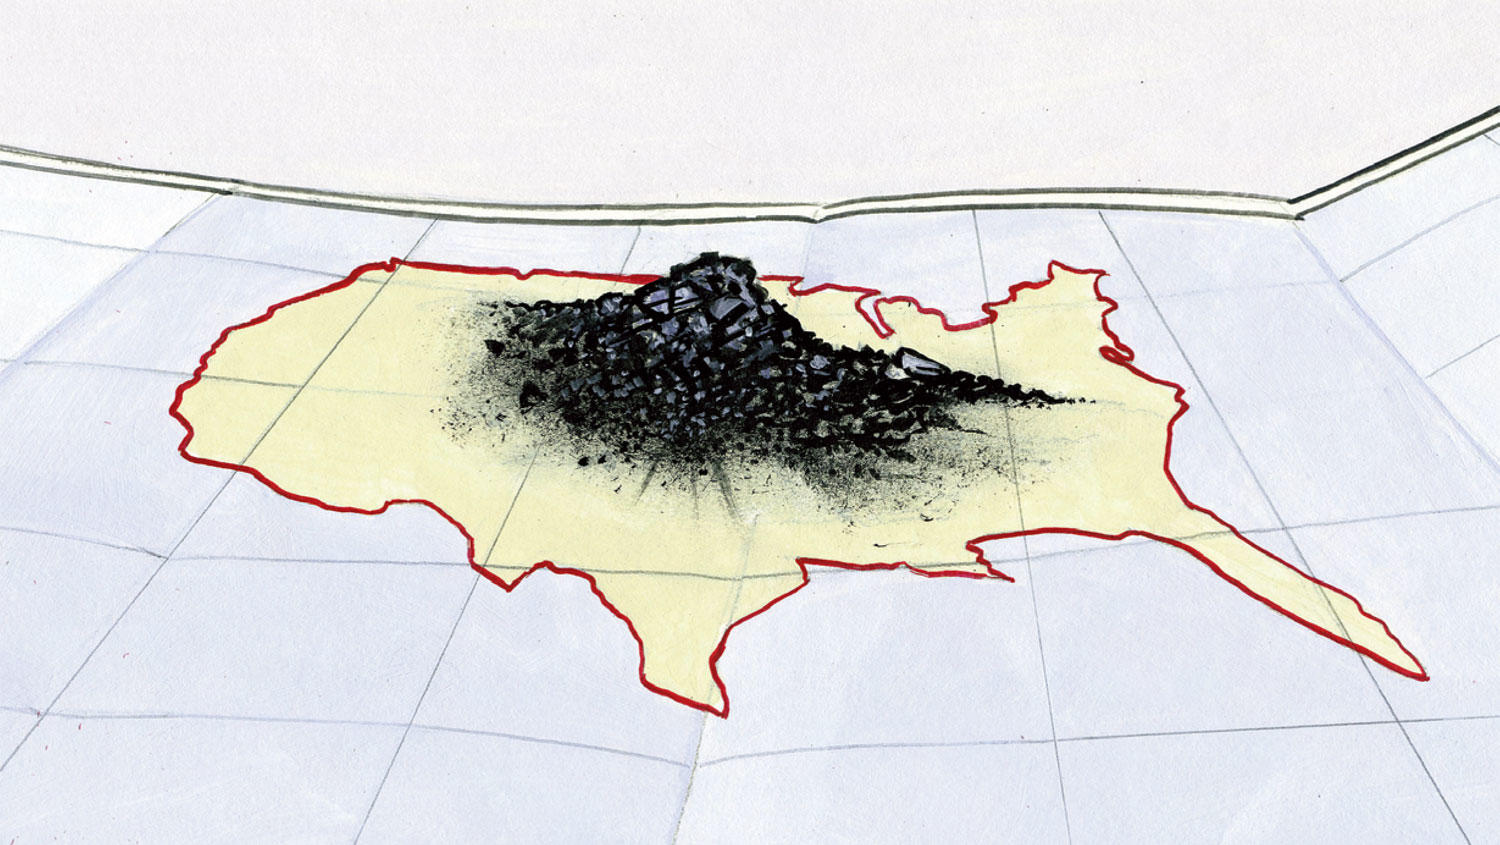 Illustration by Arthur E. Giron of a map of America with a pile of coal on top of it